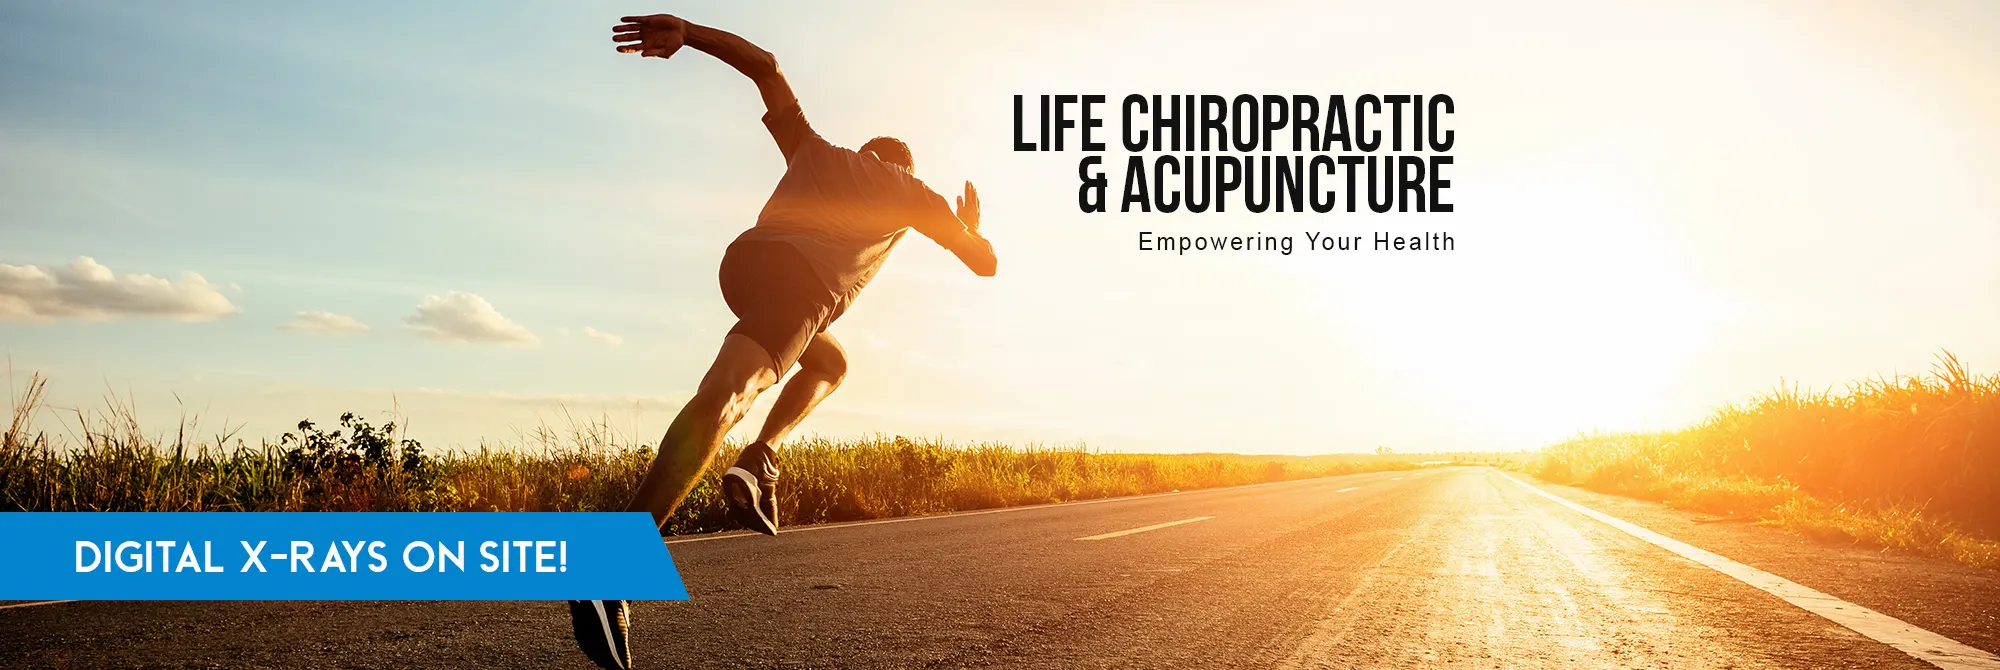 Life Chiropractic & Acupuncture